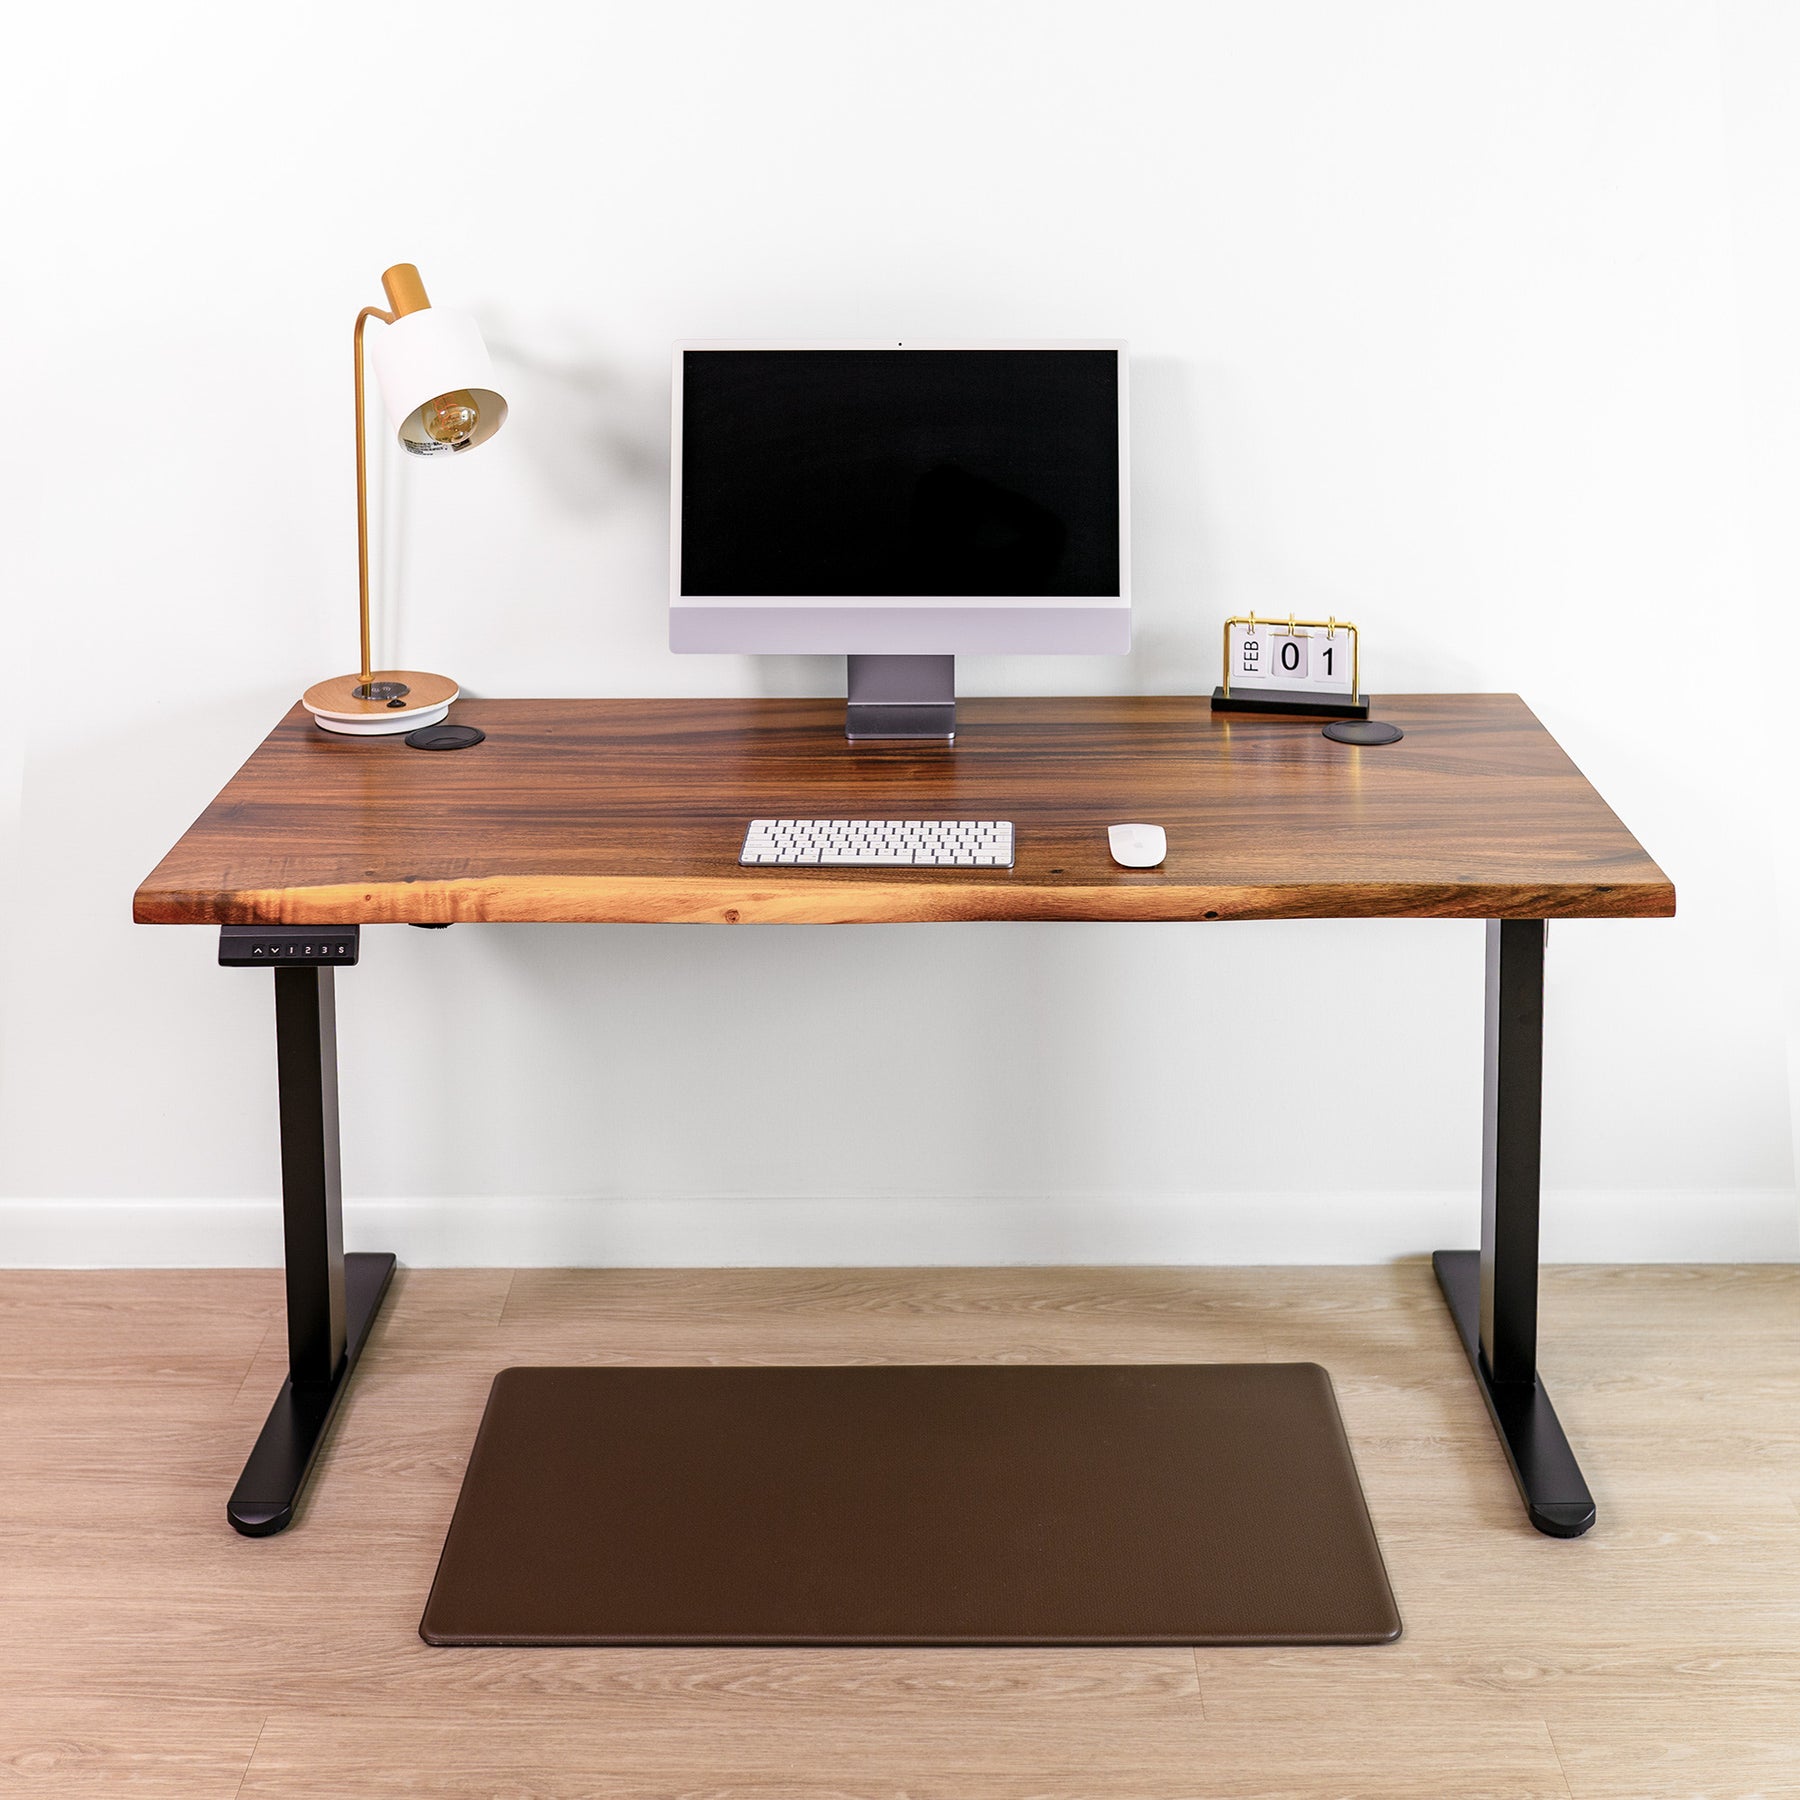 Adjustable standing desk with dual motor legs, warm brown walnut wood, natural live edge, and eco-friendly finish.